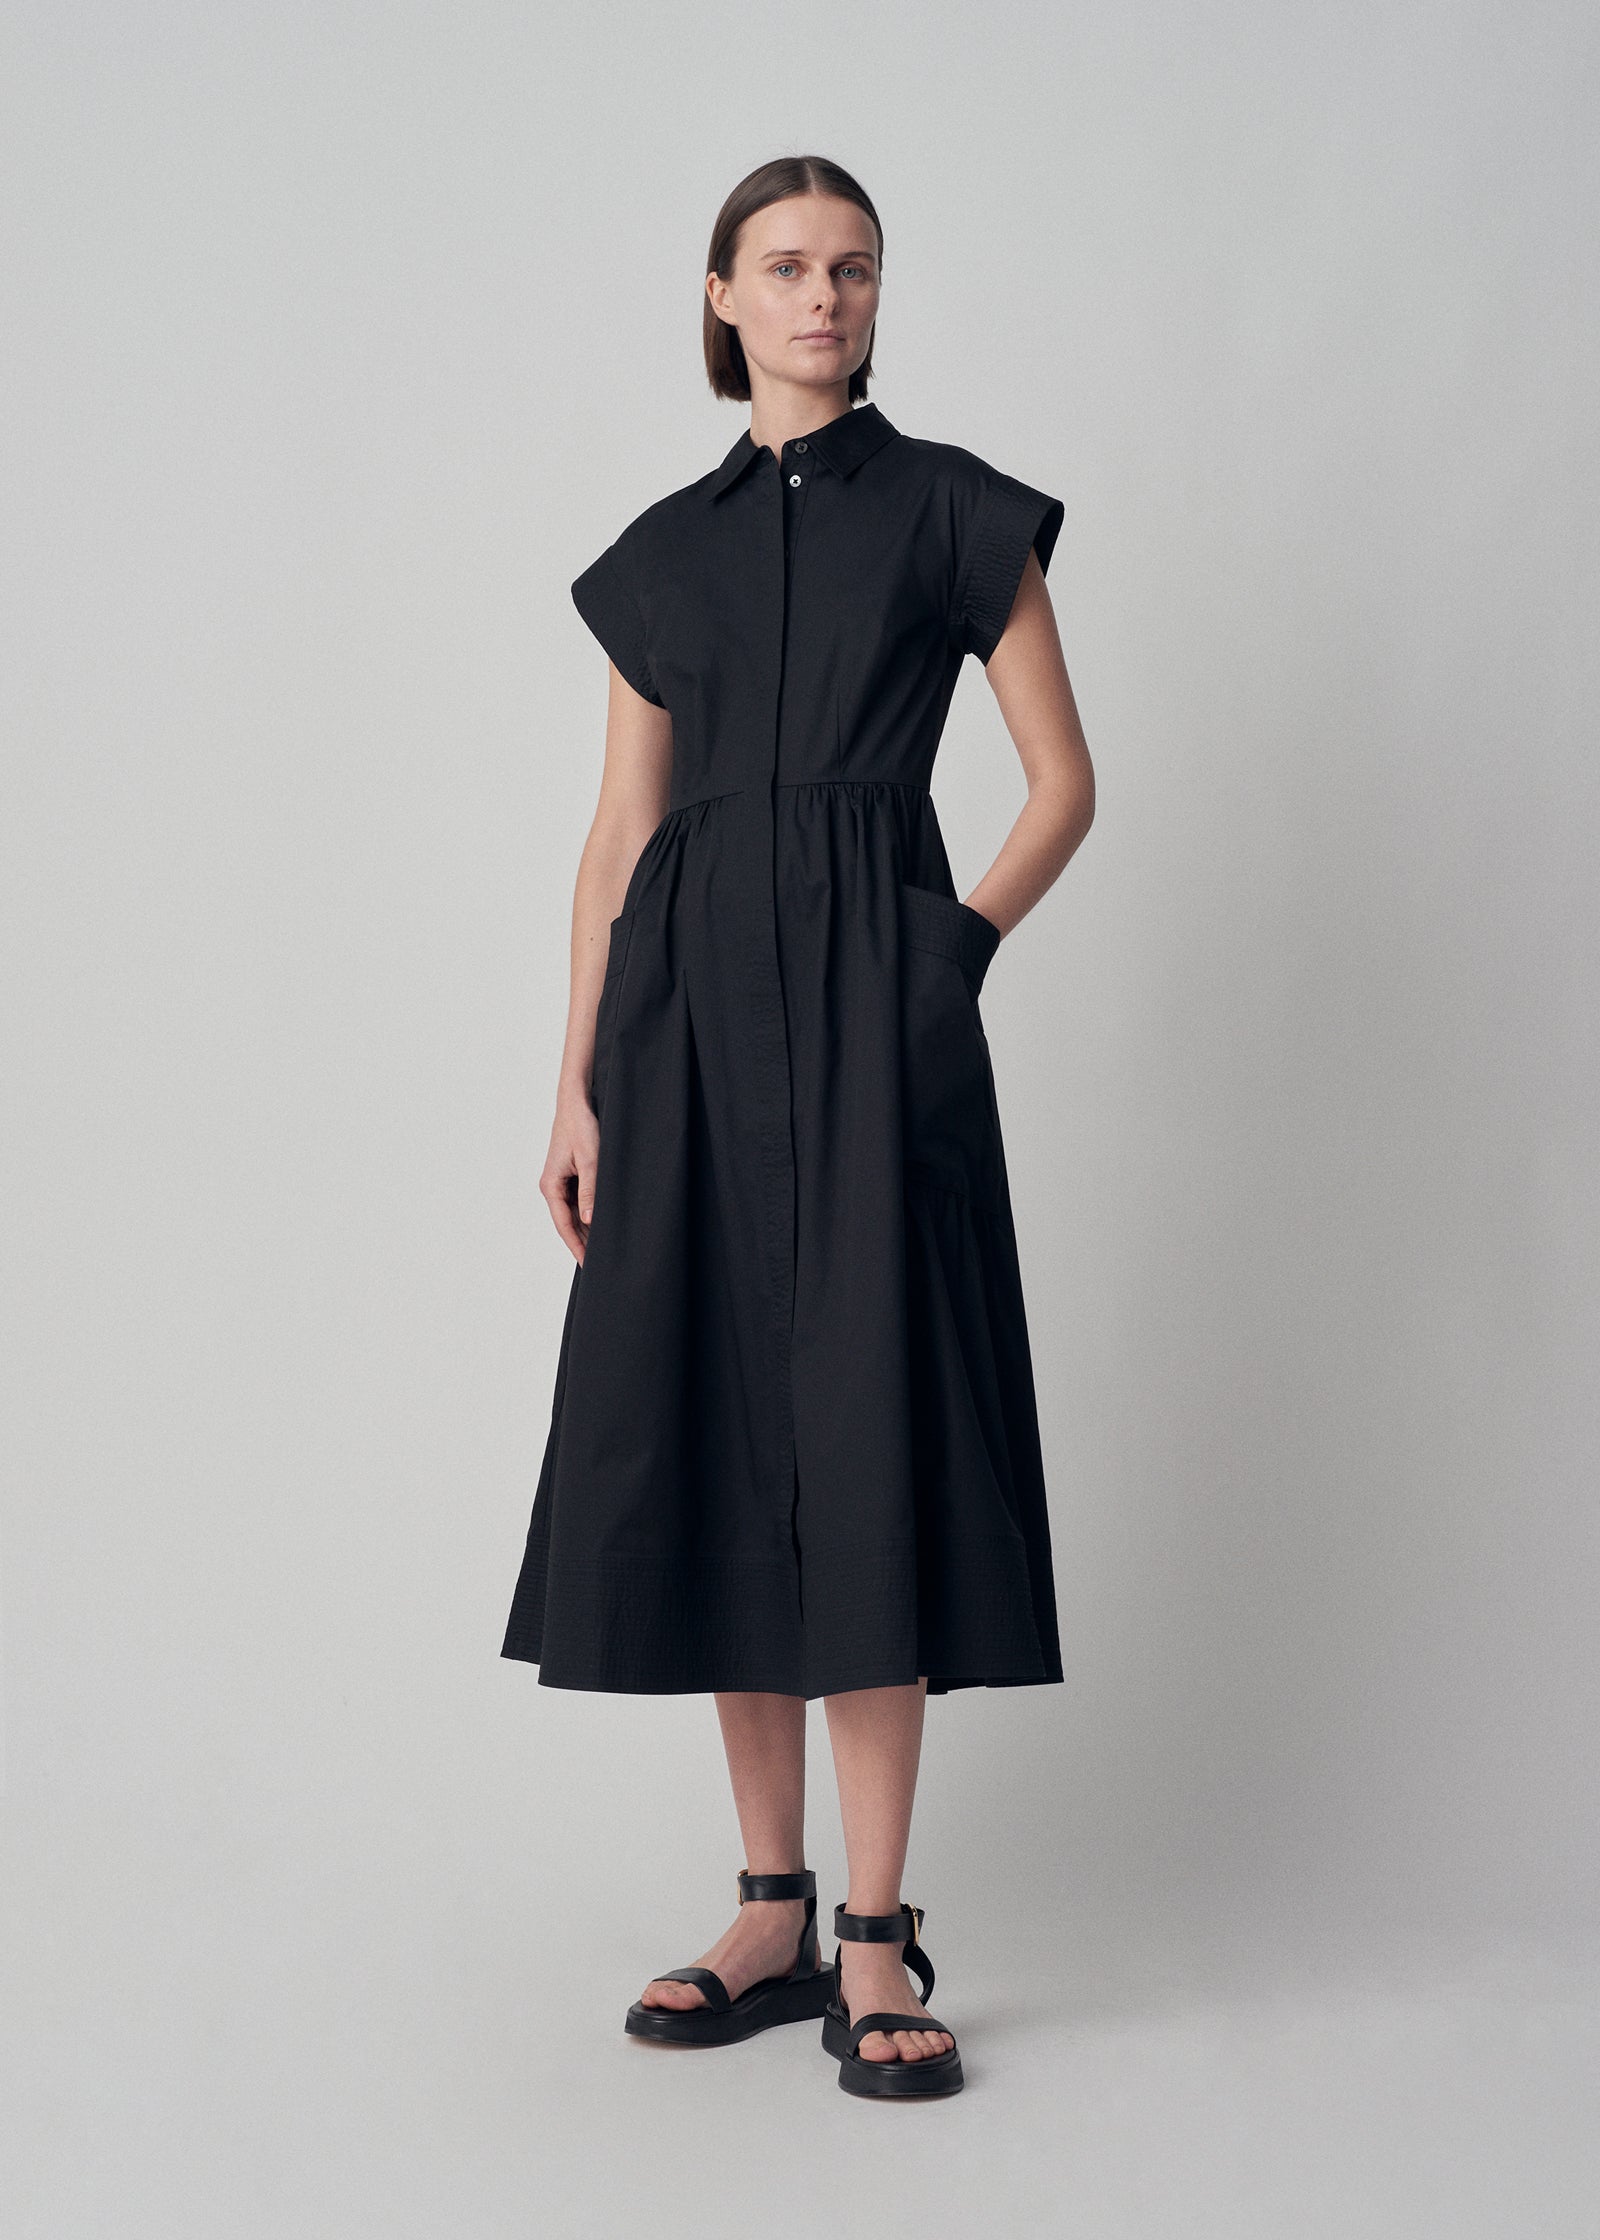 Cap Sleeve Dress in Cotton Poplin - Black - CO Collections